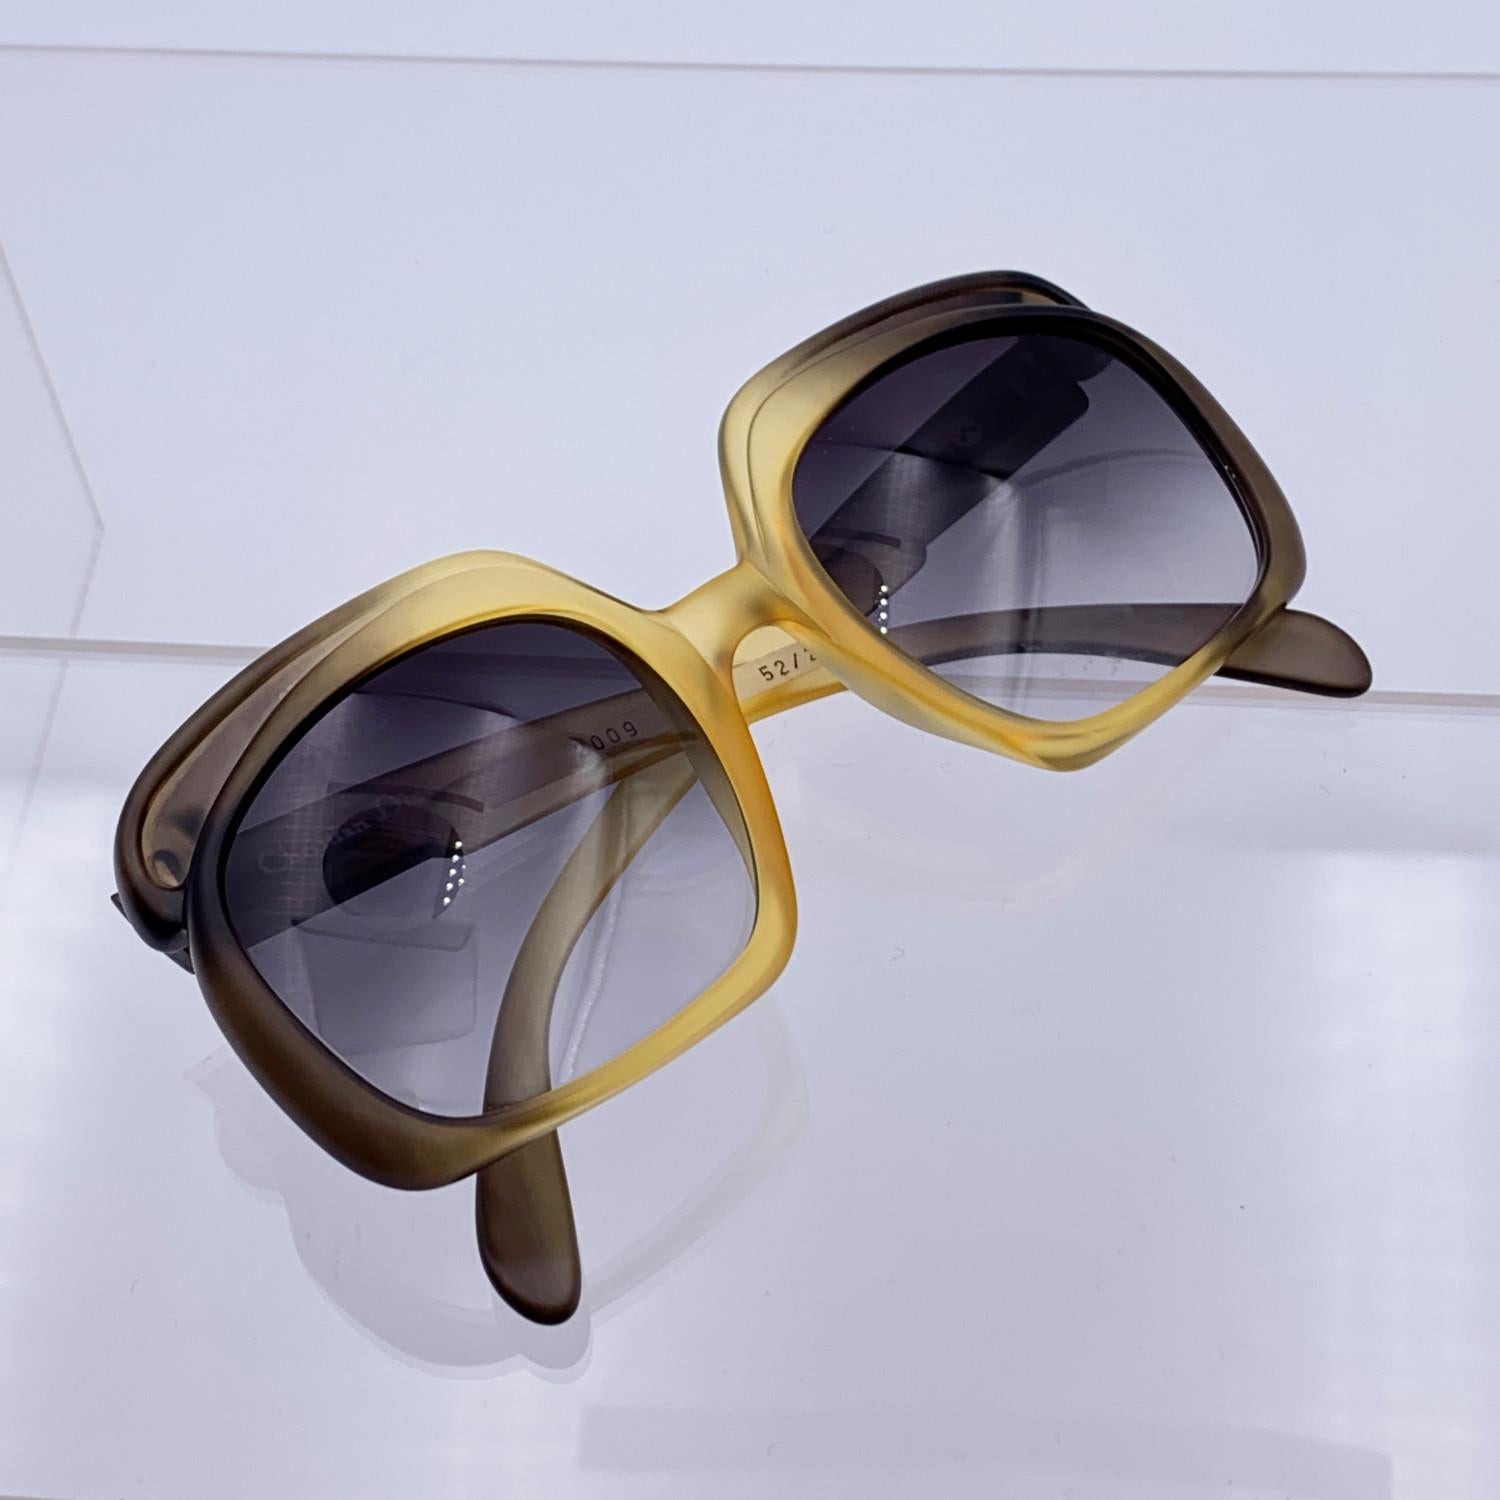 Vintage Christian Dior oversize sunglasses, Mod. 2009- Col D 272. Ombre' yellow and dark green Optyl frame.. Original 100% Total UVA/UVB protection in gradient grey color. CD logo on temples. Made in Germany

Details

MATERIAL: Acetate

COLOR: